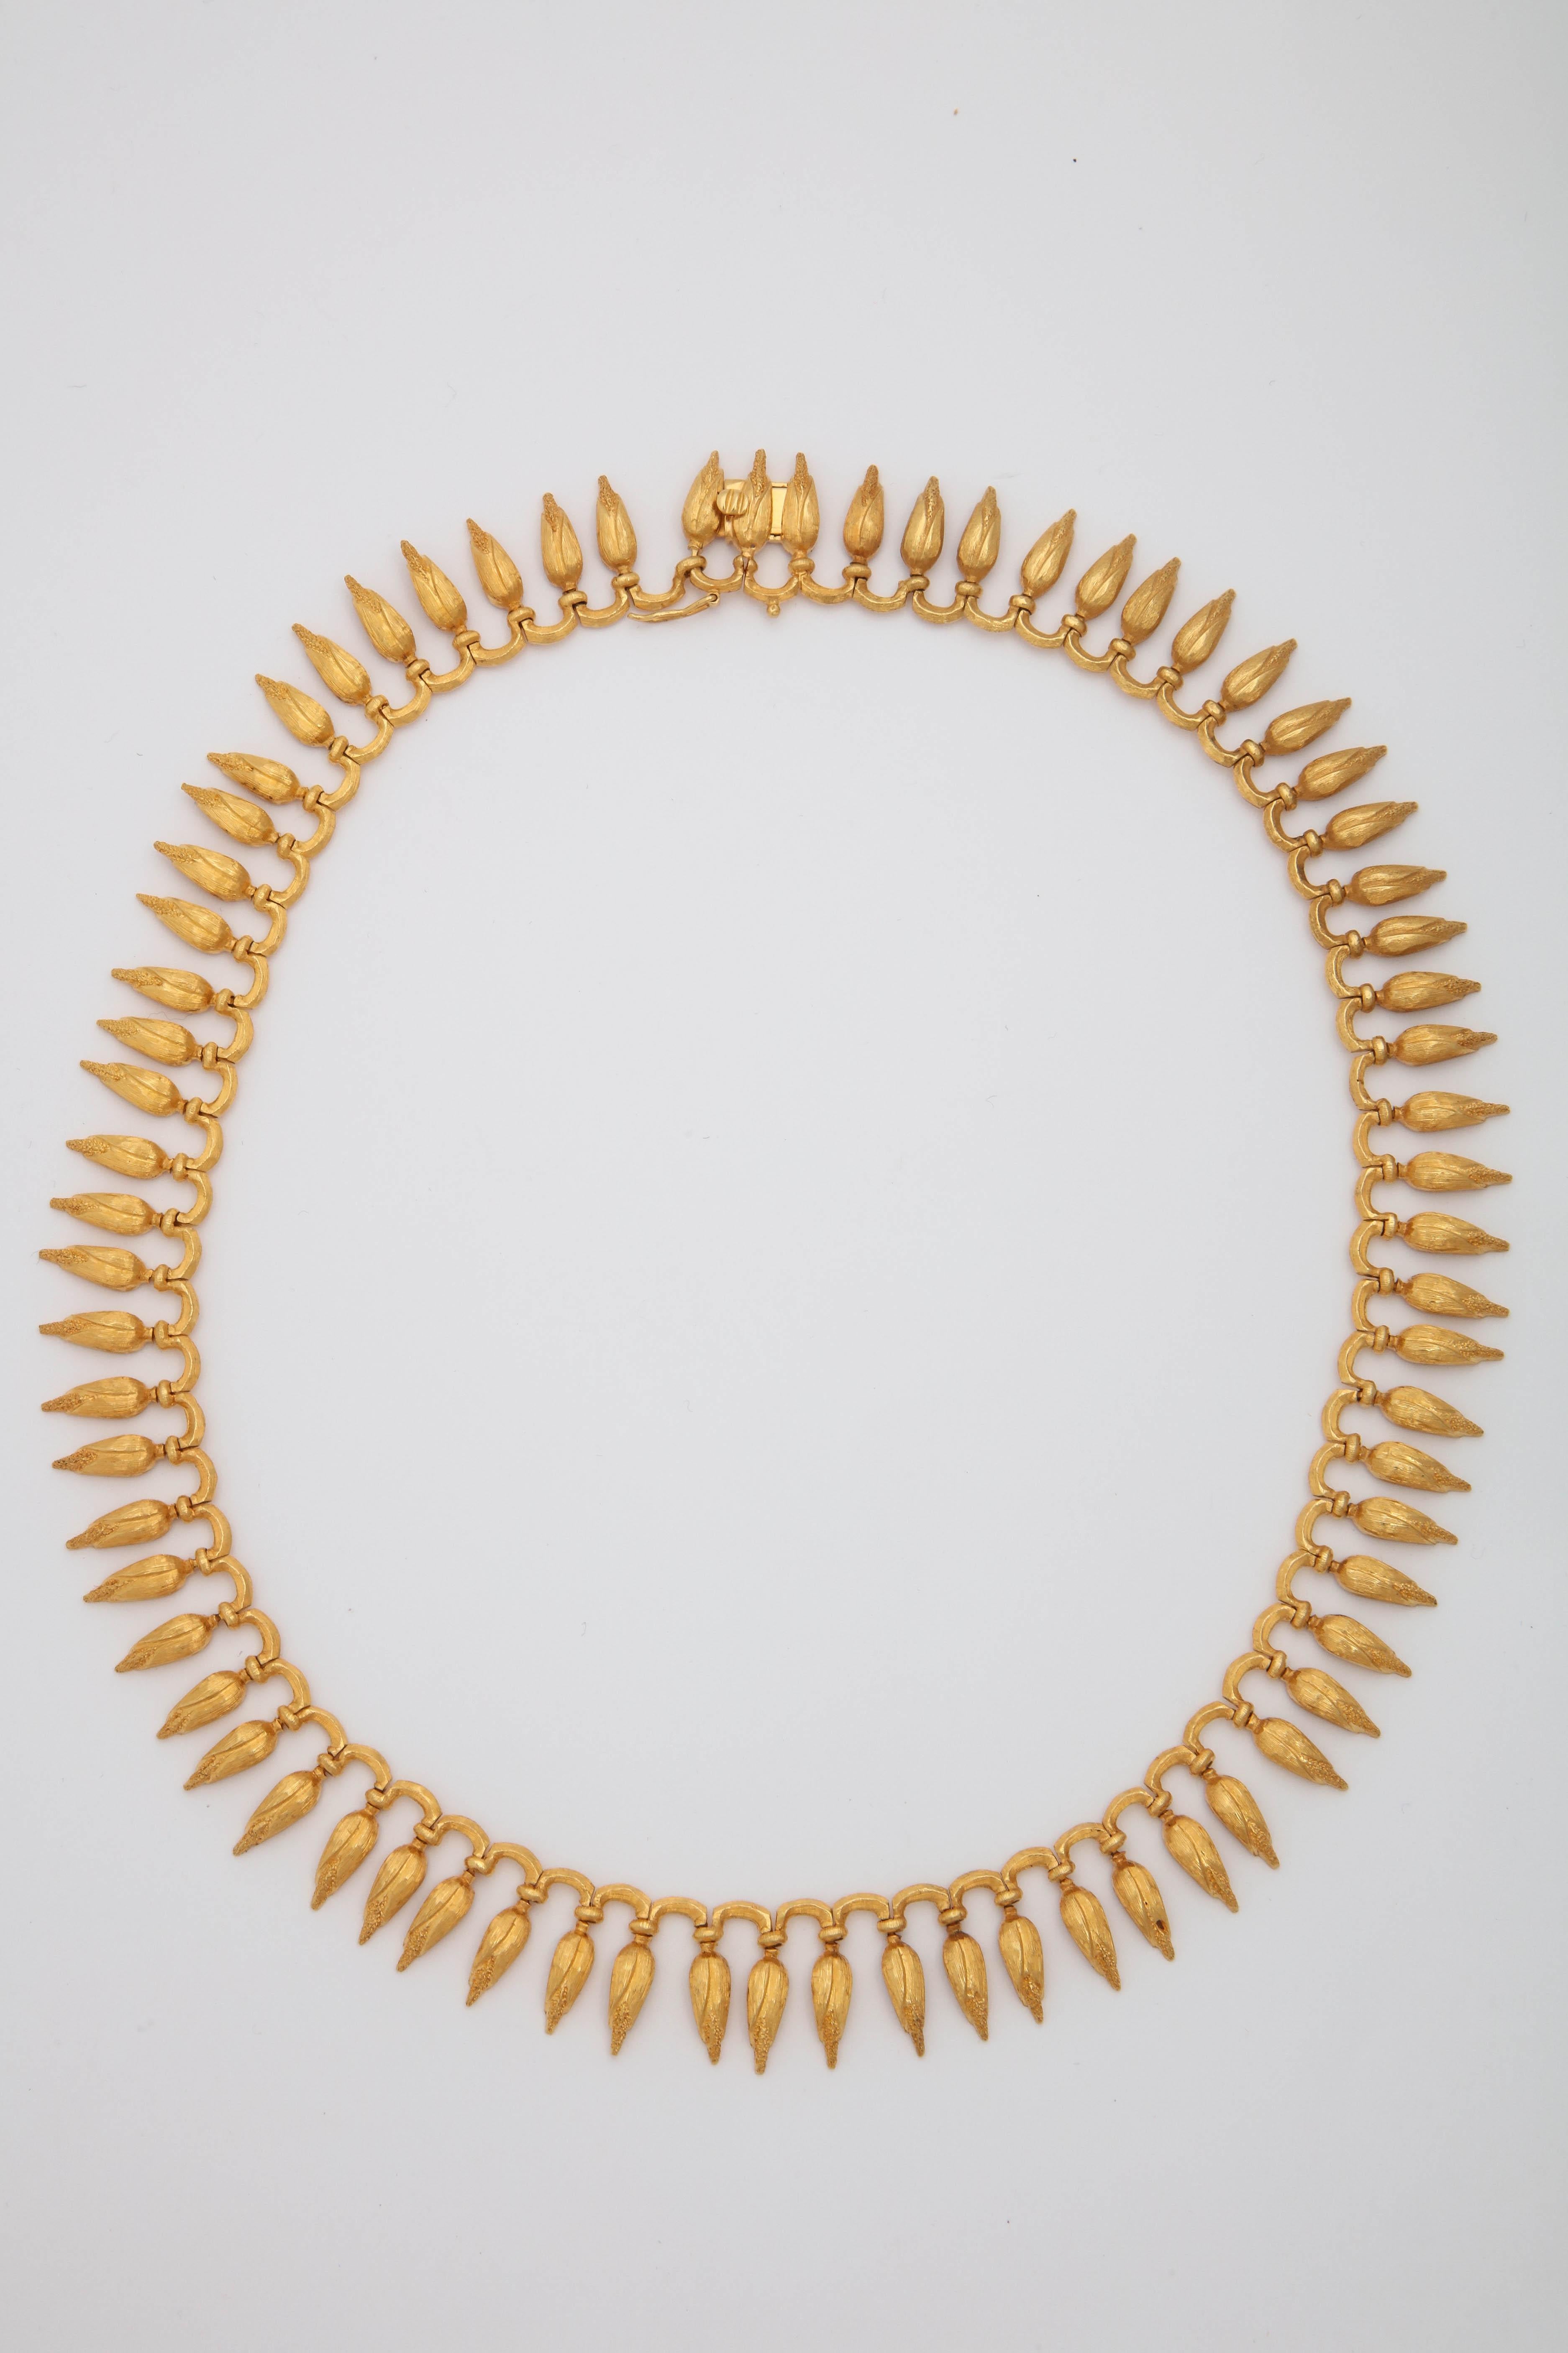 One Ladies 18kt Textured Gold Handmade Necklace Designed By Lalaounis Created In All Flexible Dangle Leaf Design Pieces. NOTE: Necklace Tests To Be Higher Karat Gold. Designed In The 1950's In Greece.